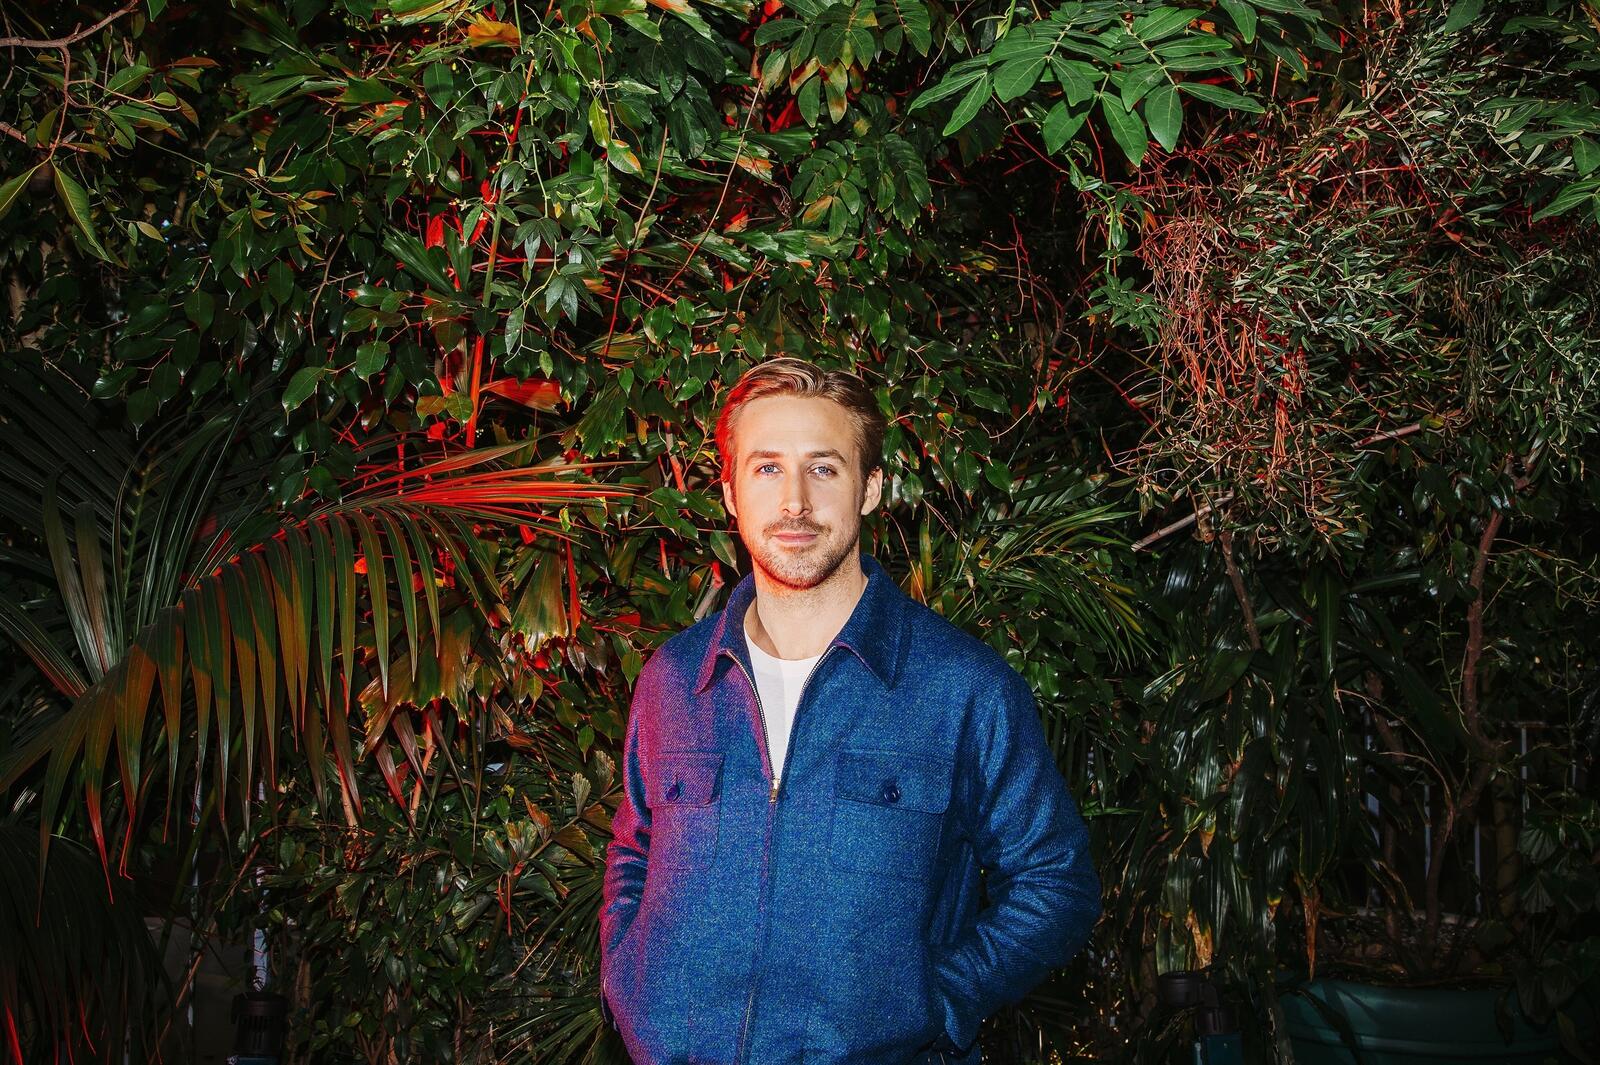 Free photo Ryan Gosling is photographed against a backdrop of plants